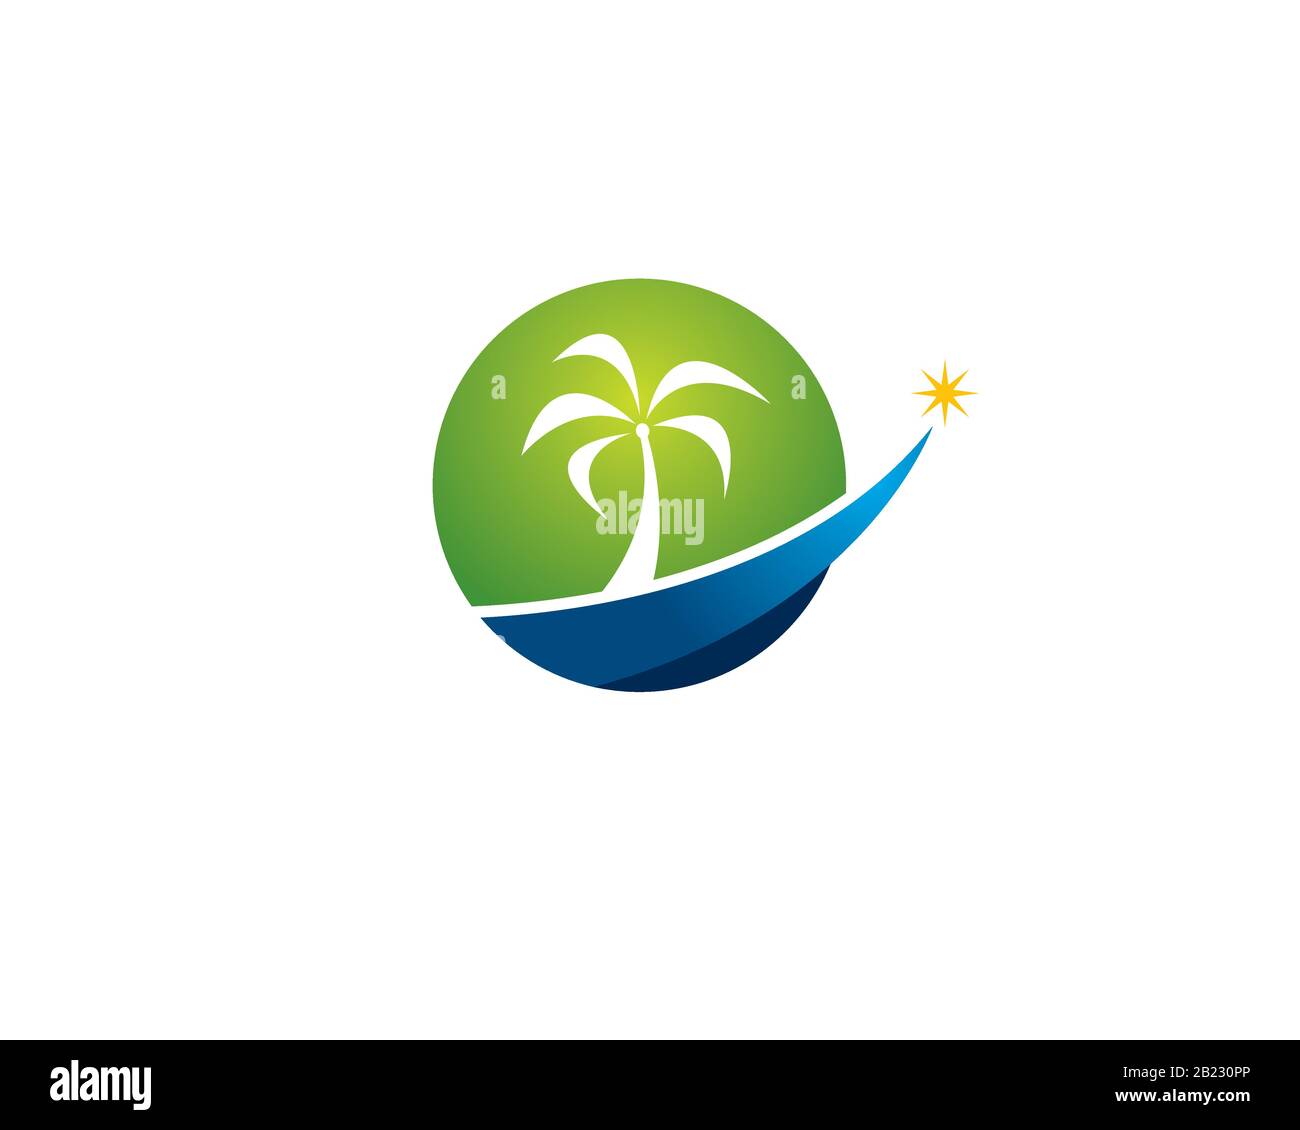 palm tree inside circular round geometry with shooting star achieving goals Stock Vector